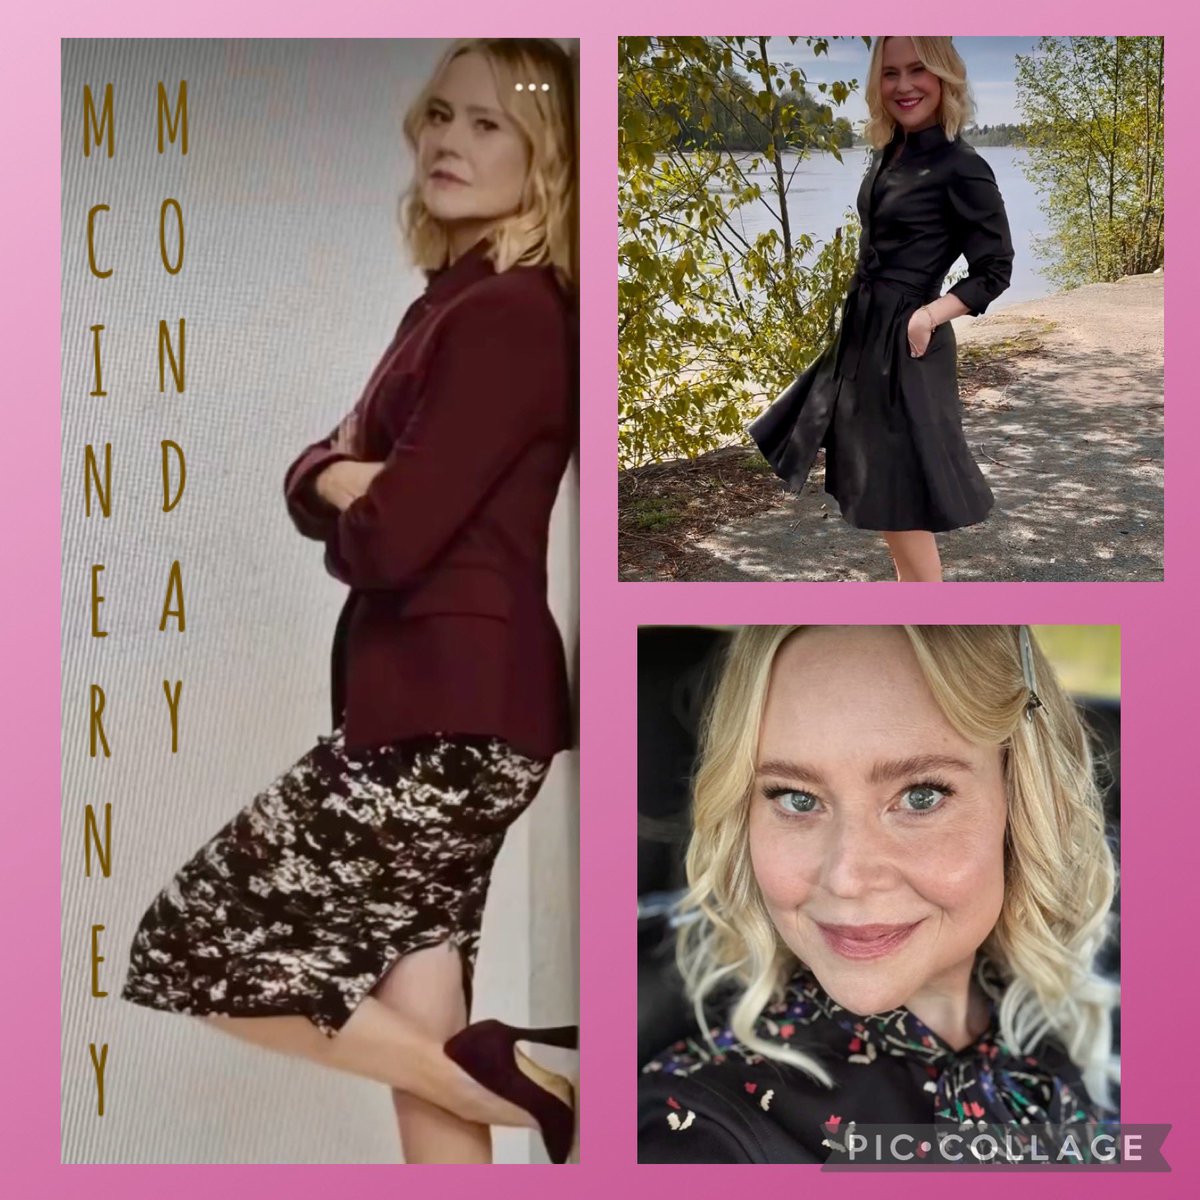 Happy #McInerneyMonday everyone. The gorgeous @kristintbooth shared some new BTS pics with us last night and I have to say that I’m really looking forward to seeing Shane’s wardrobe in the new movies, although the #POstables know that she will be stunning whatever she wears 😍💌